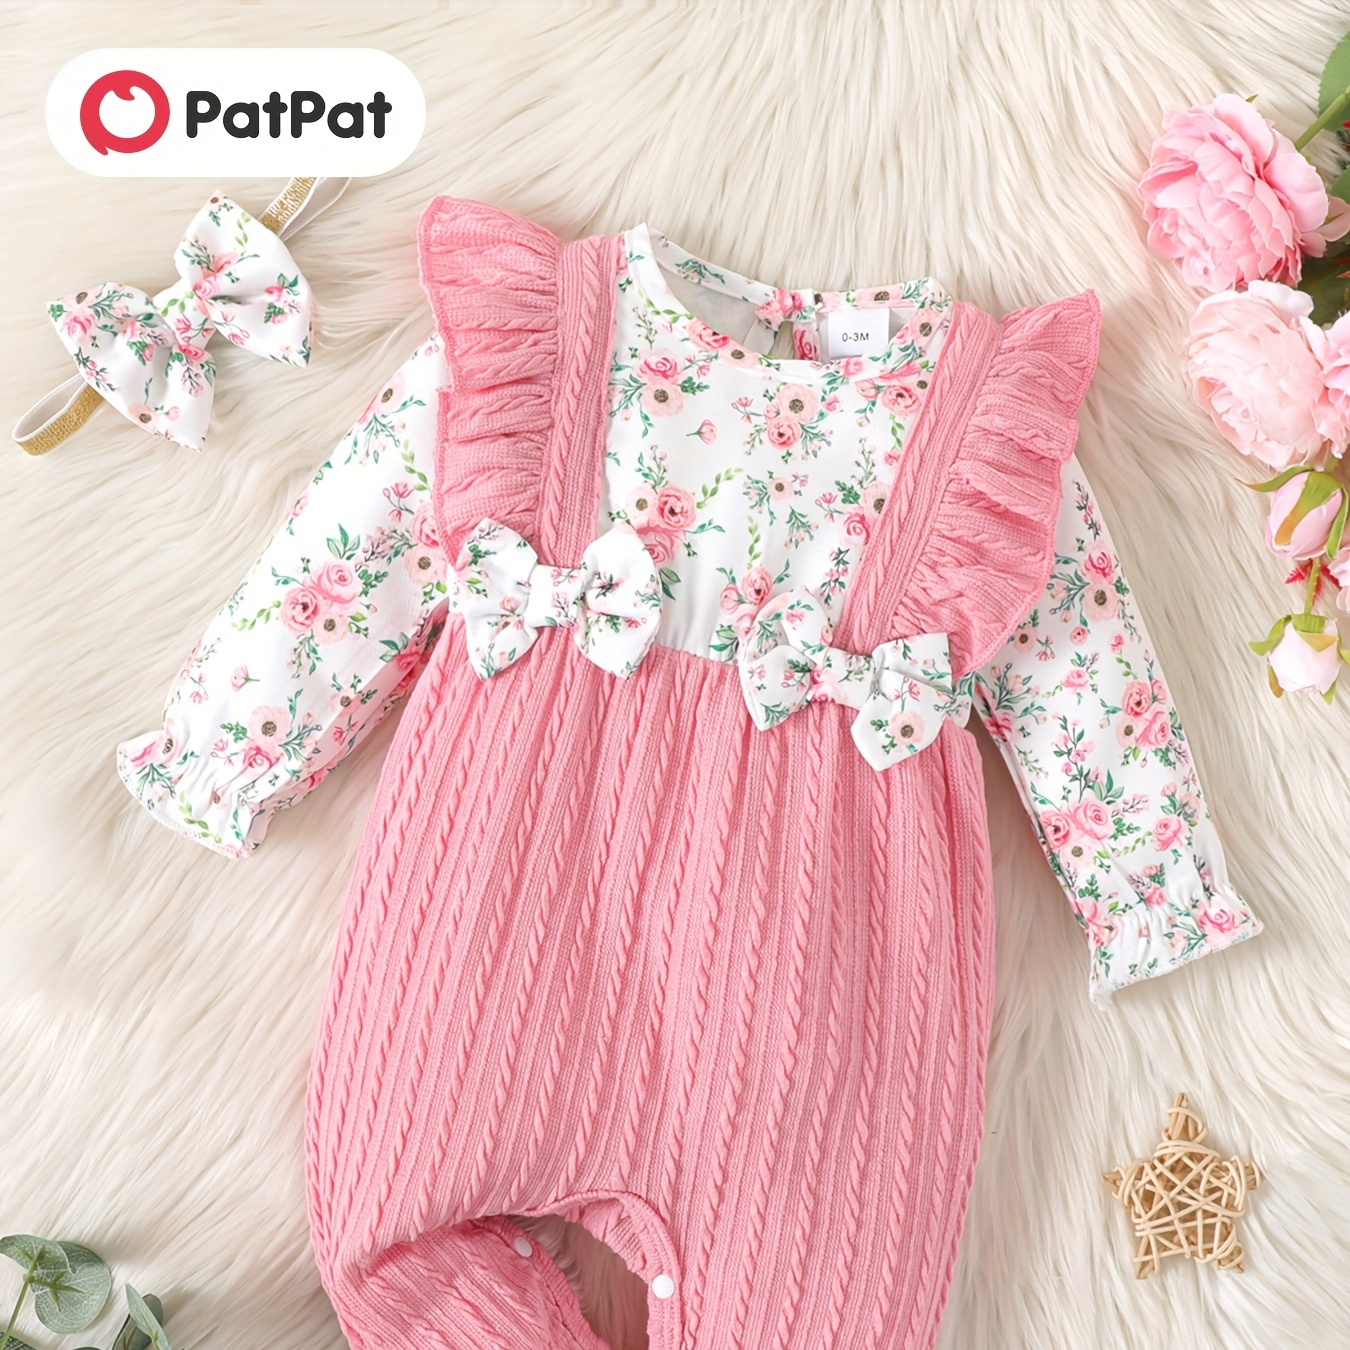 

Patpat 2pcs Baby Girl Long-sleeved Cute Ruffle Trim Bow Front Floral Print Textured Spliced Jumpsuit & Headband Set